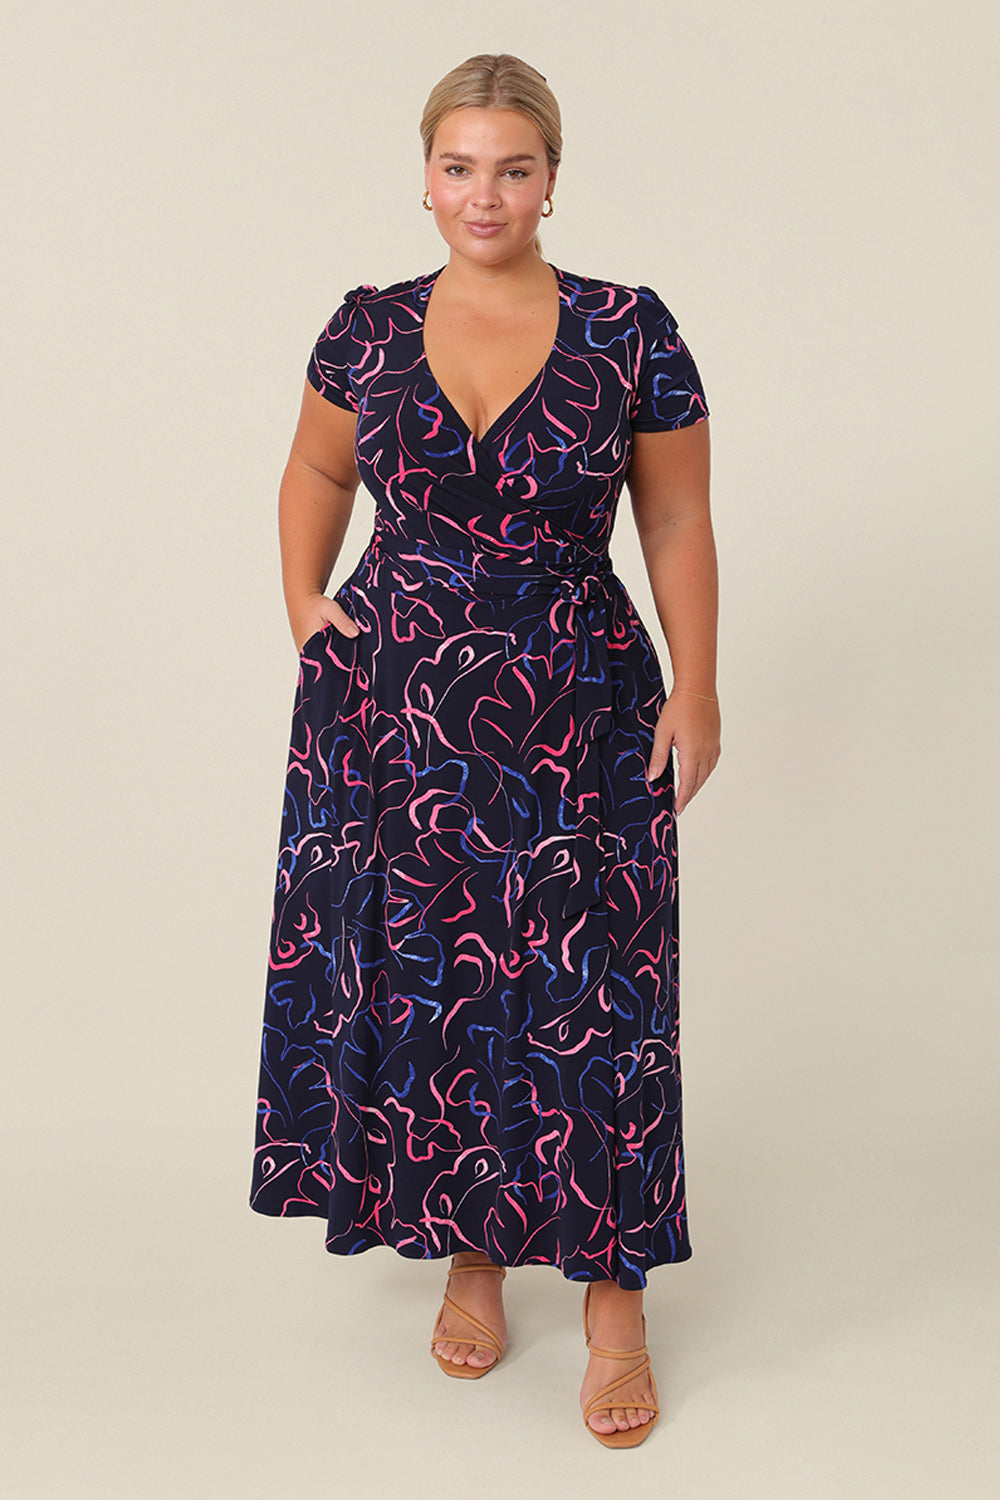 A petite height, size 16 woman wears a good midi length dress. The Alexis Dress in Silhouette is a functioning wrap dress, great for an occasion. This women’s dress is made in Australia in sizes 8 to 24.